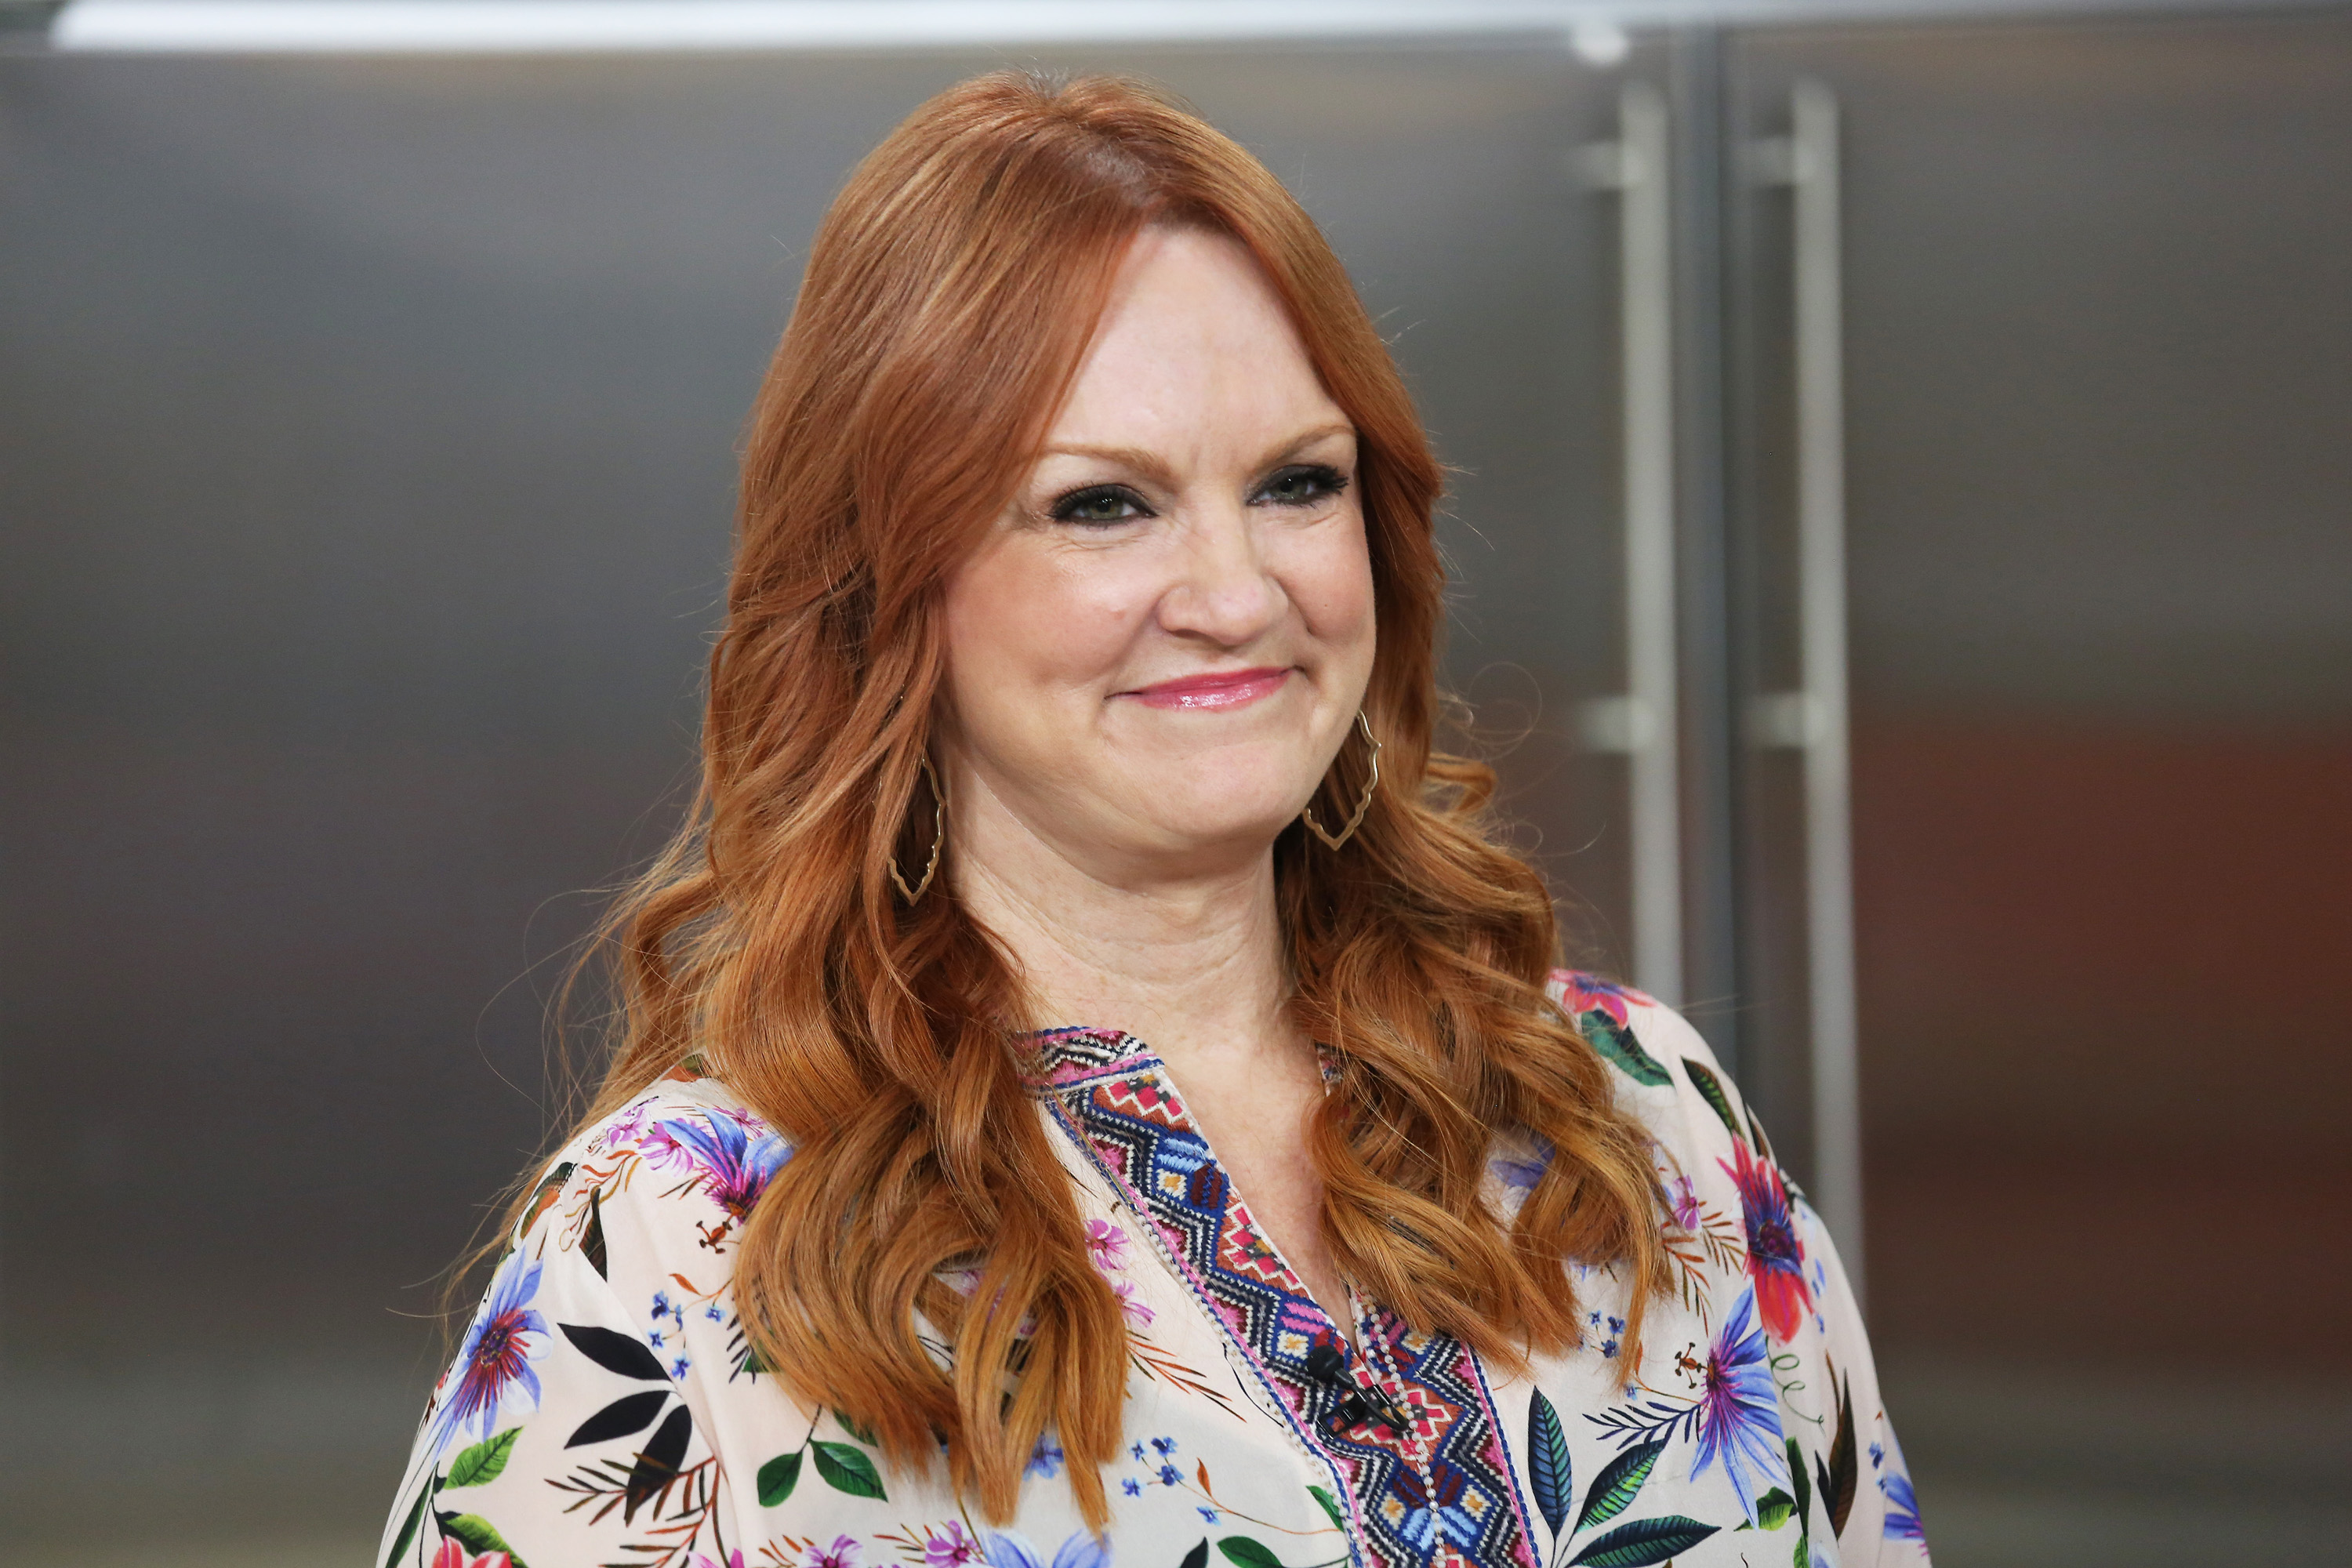 Ree Drummond smiles while wearing a floral shirt on the set of the Today show kitchen.